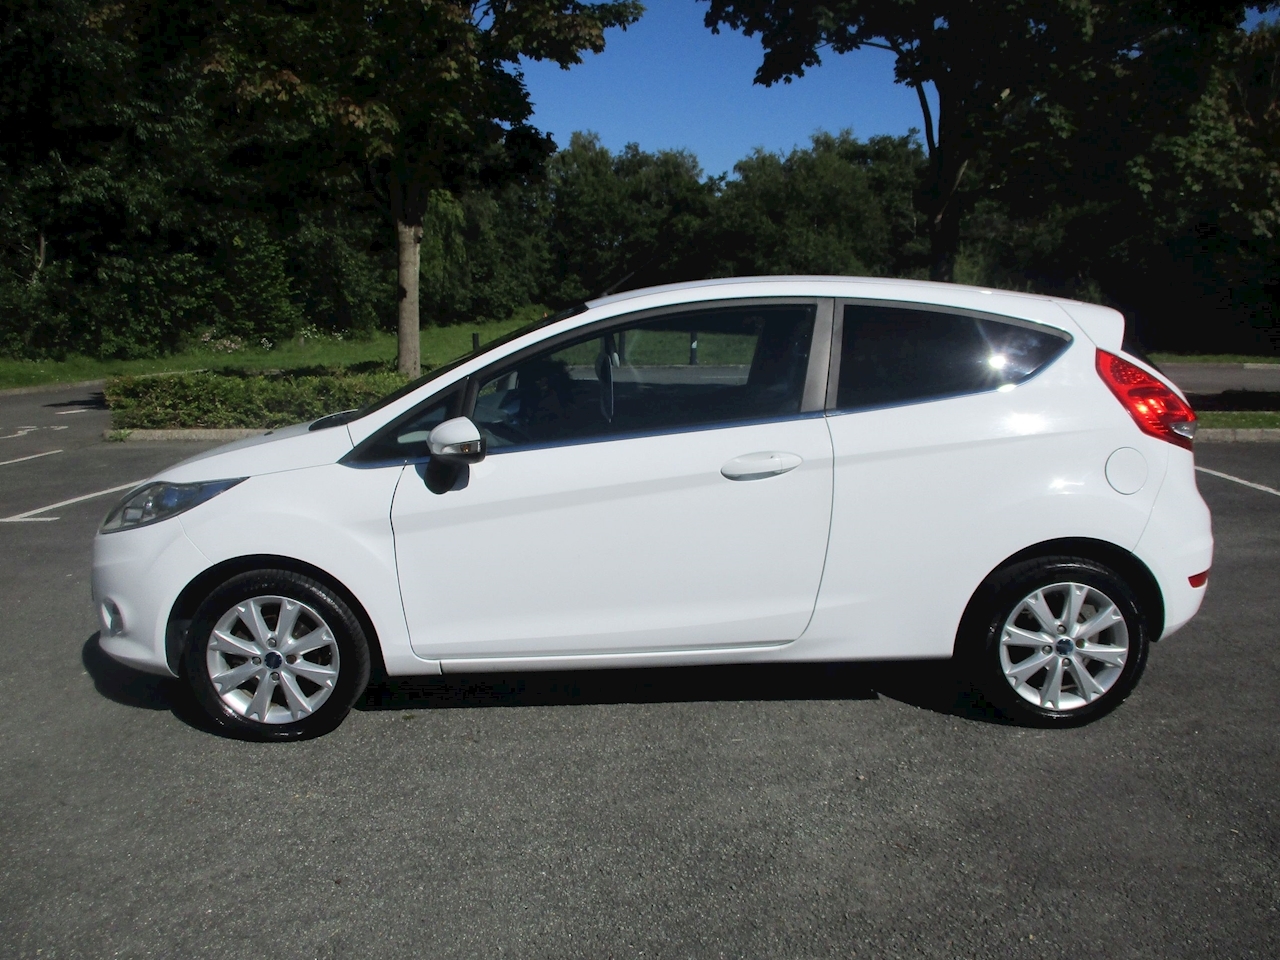 FORD FIESTA ford-fiesta-2010-for-sale-in-limerick-for-eur5-250-on